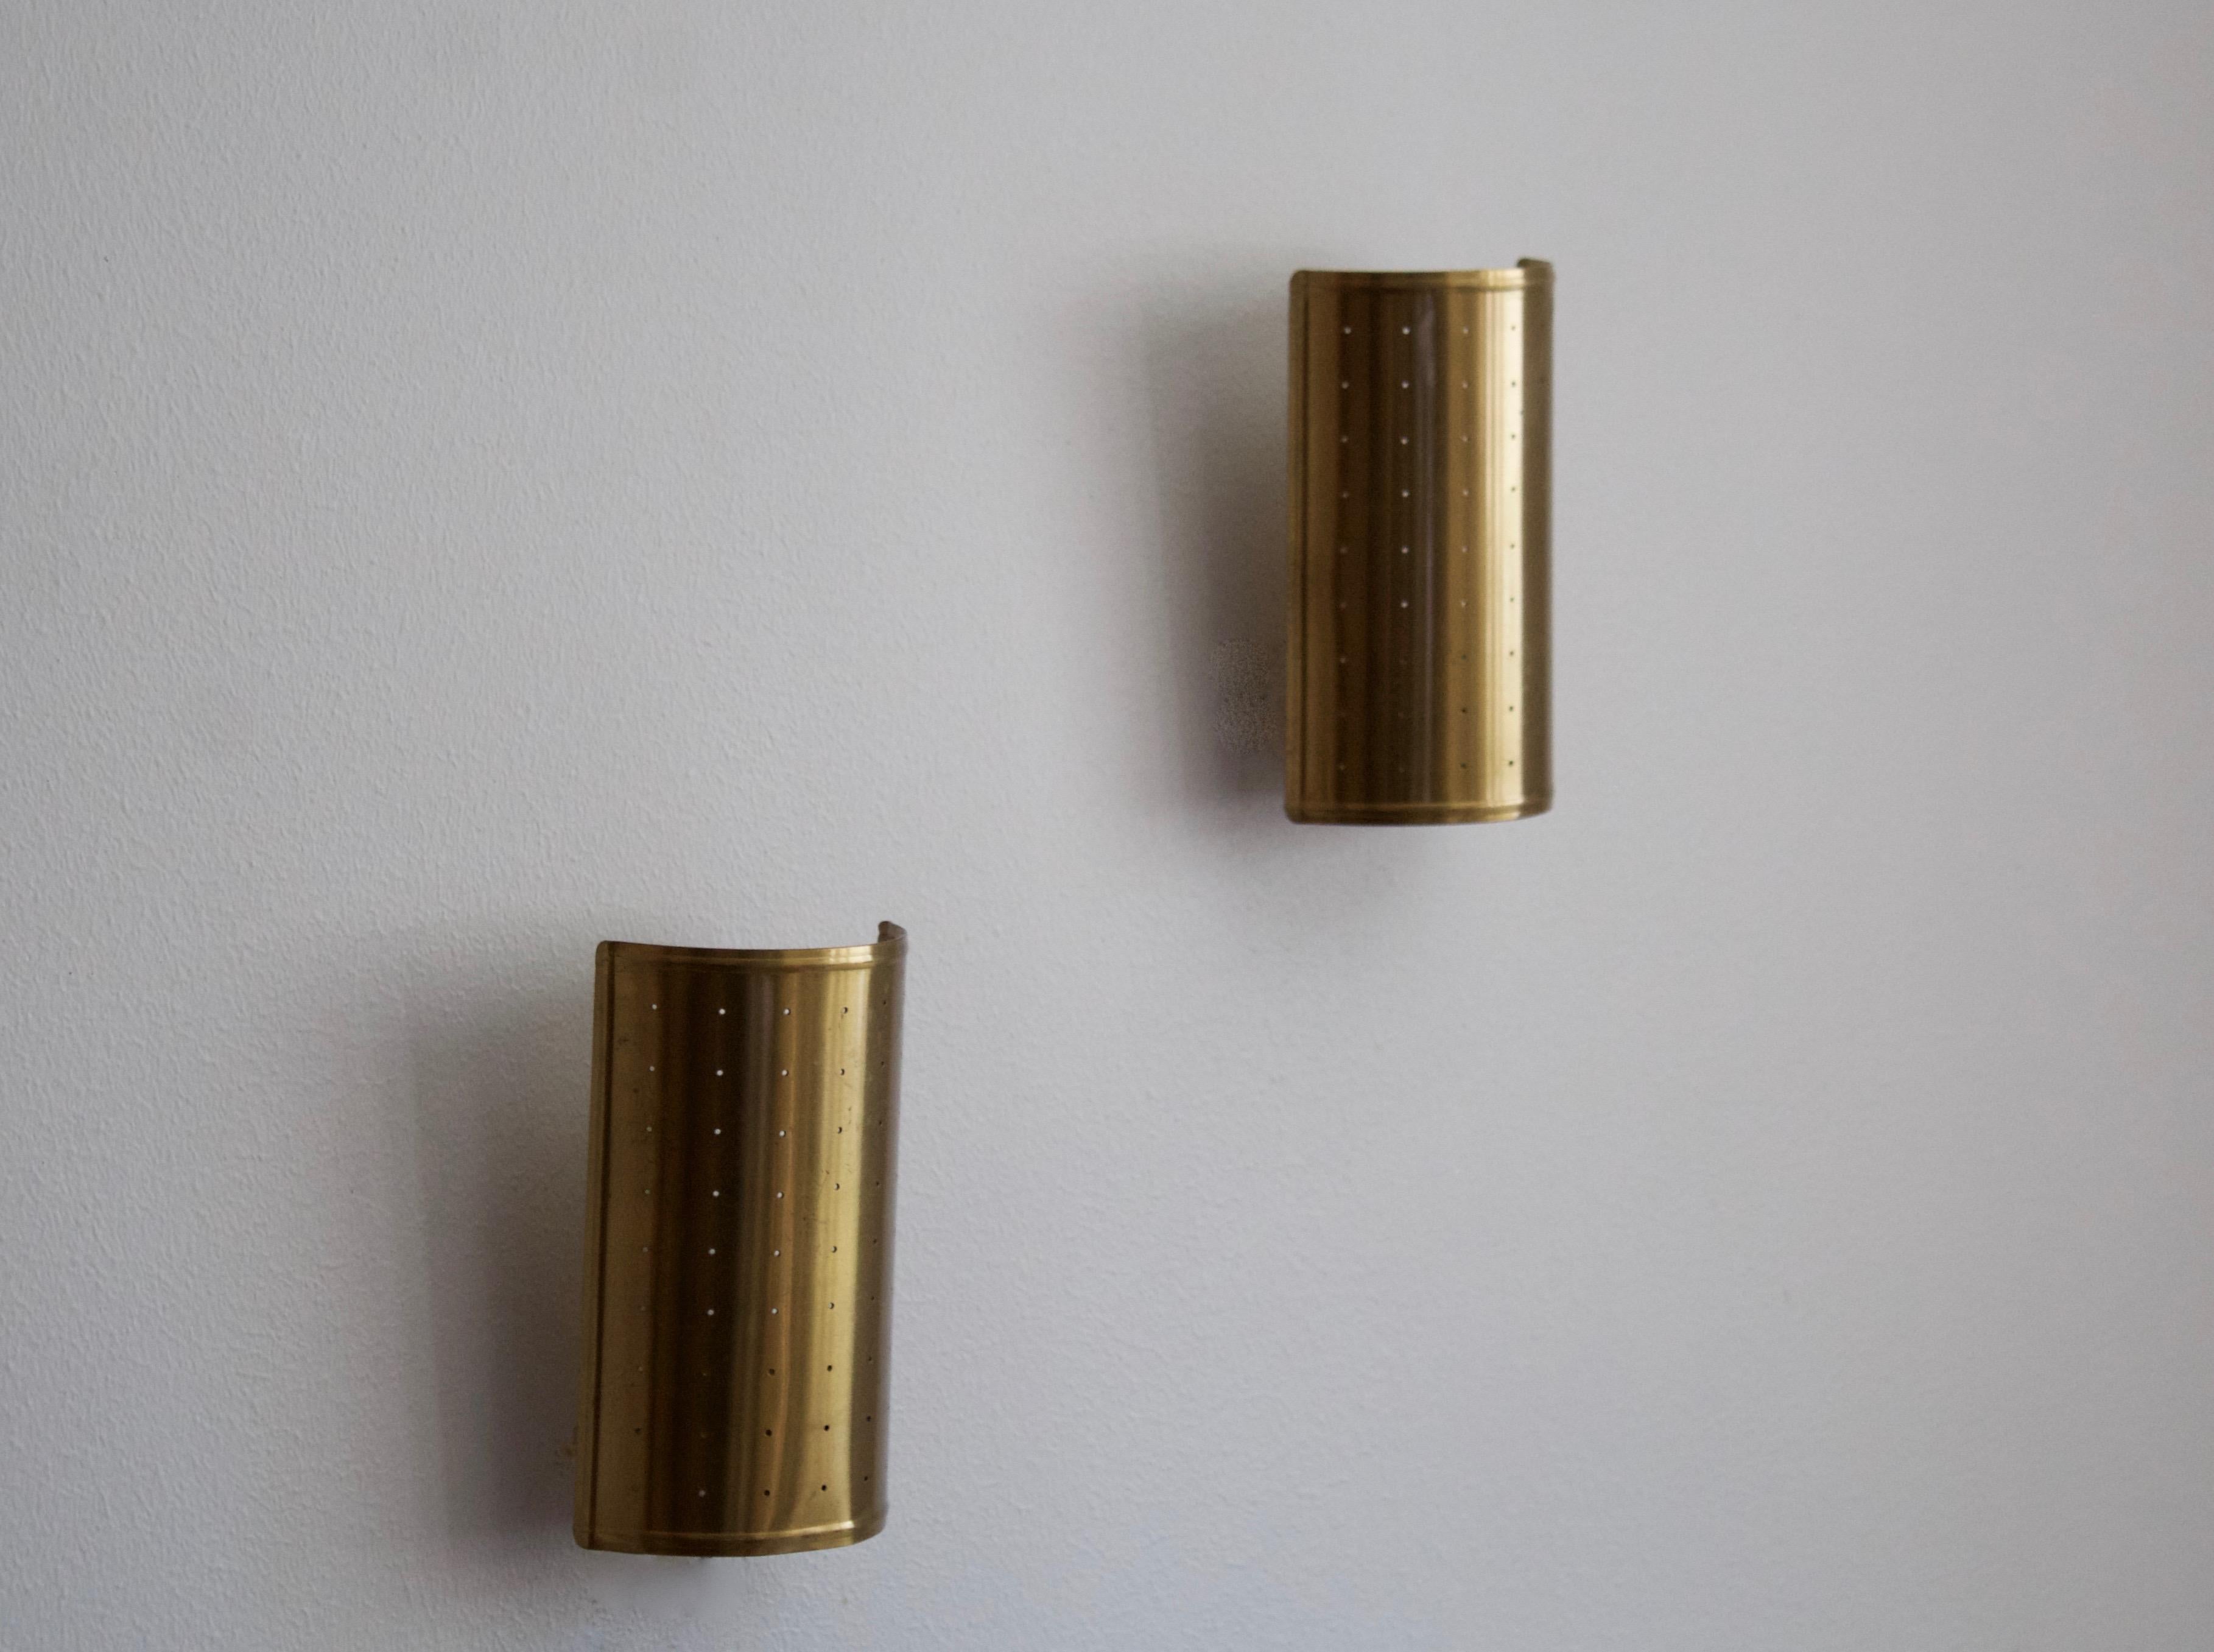 A pair of wall lights / sconces. Designed and produced in Sweden, c. 1940s. Brass screens rest on original porcelain wall mounts

Other designers of the period include Paavo Tynell, Jean Royère, Hans Bergström, Hans-Agne Jakobsson, and Kaare